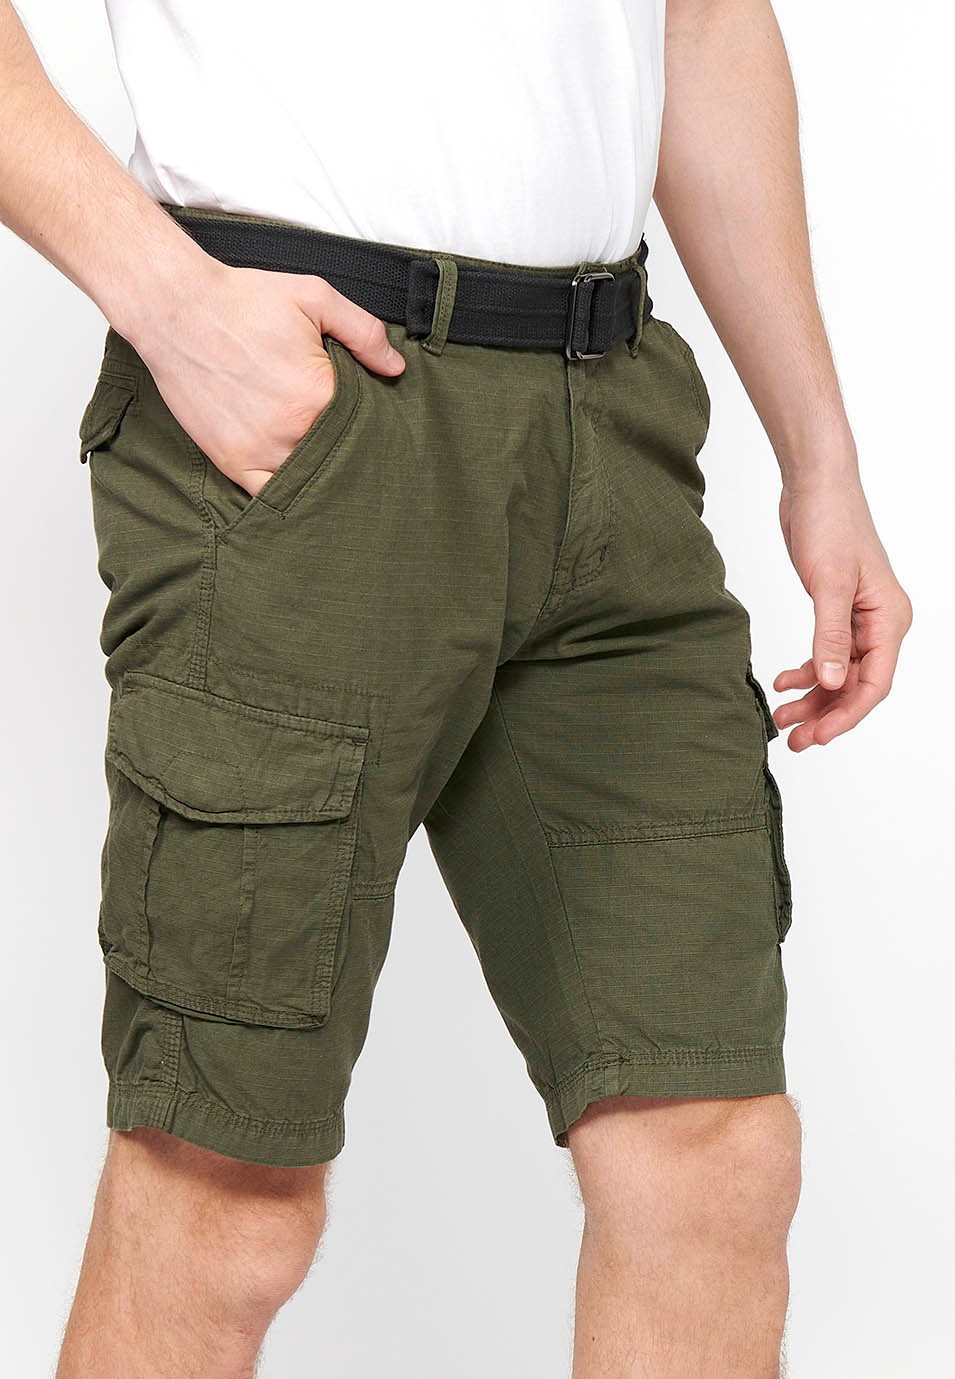 Cotton cargo shorts with belt and front closure with zipper and button with pockets, two back pockets with flap and two green cargo pants for Men 3